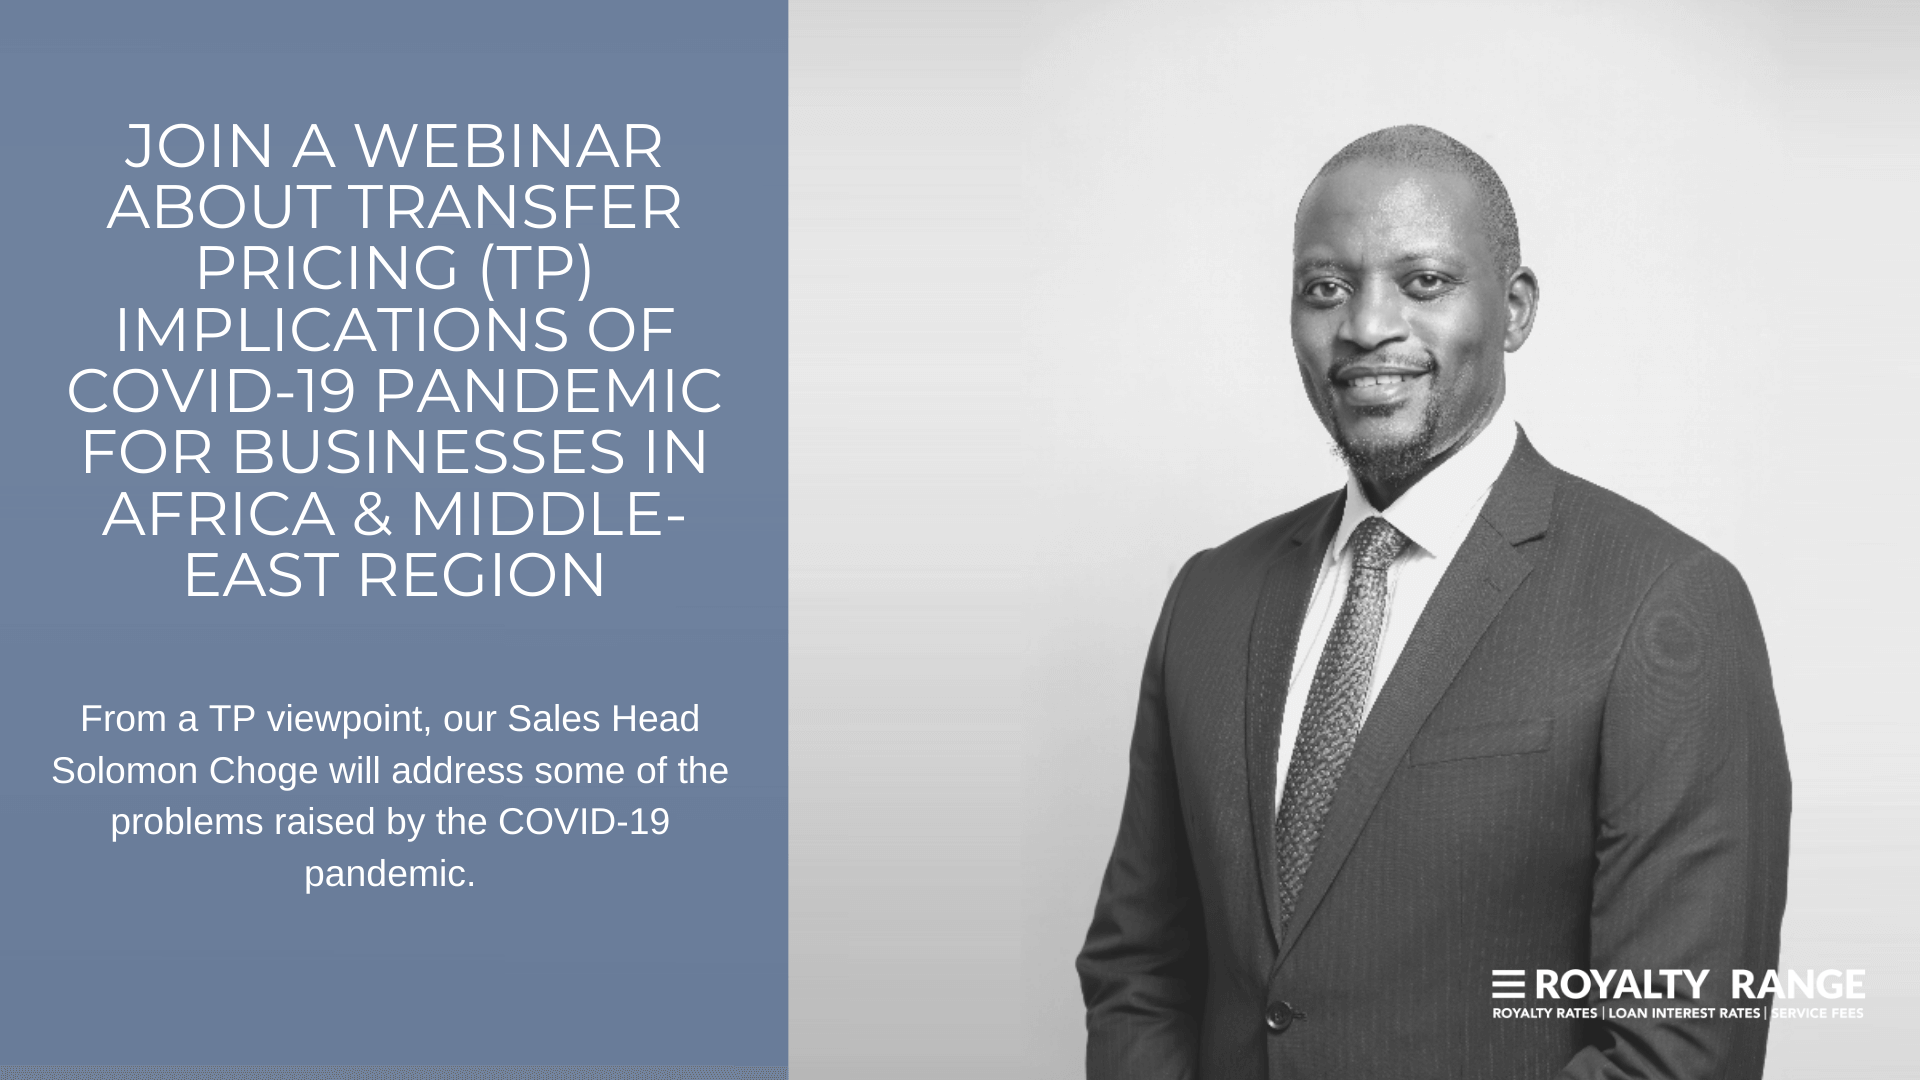 Join a Webinar About Transfer Pricing (TP) Implications of COVID-19 Pandemic for Businesses in Africa & Middle-East Region